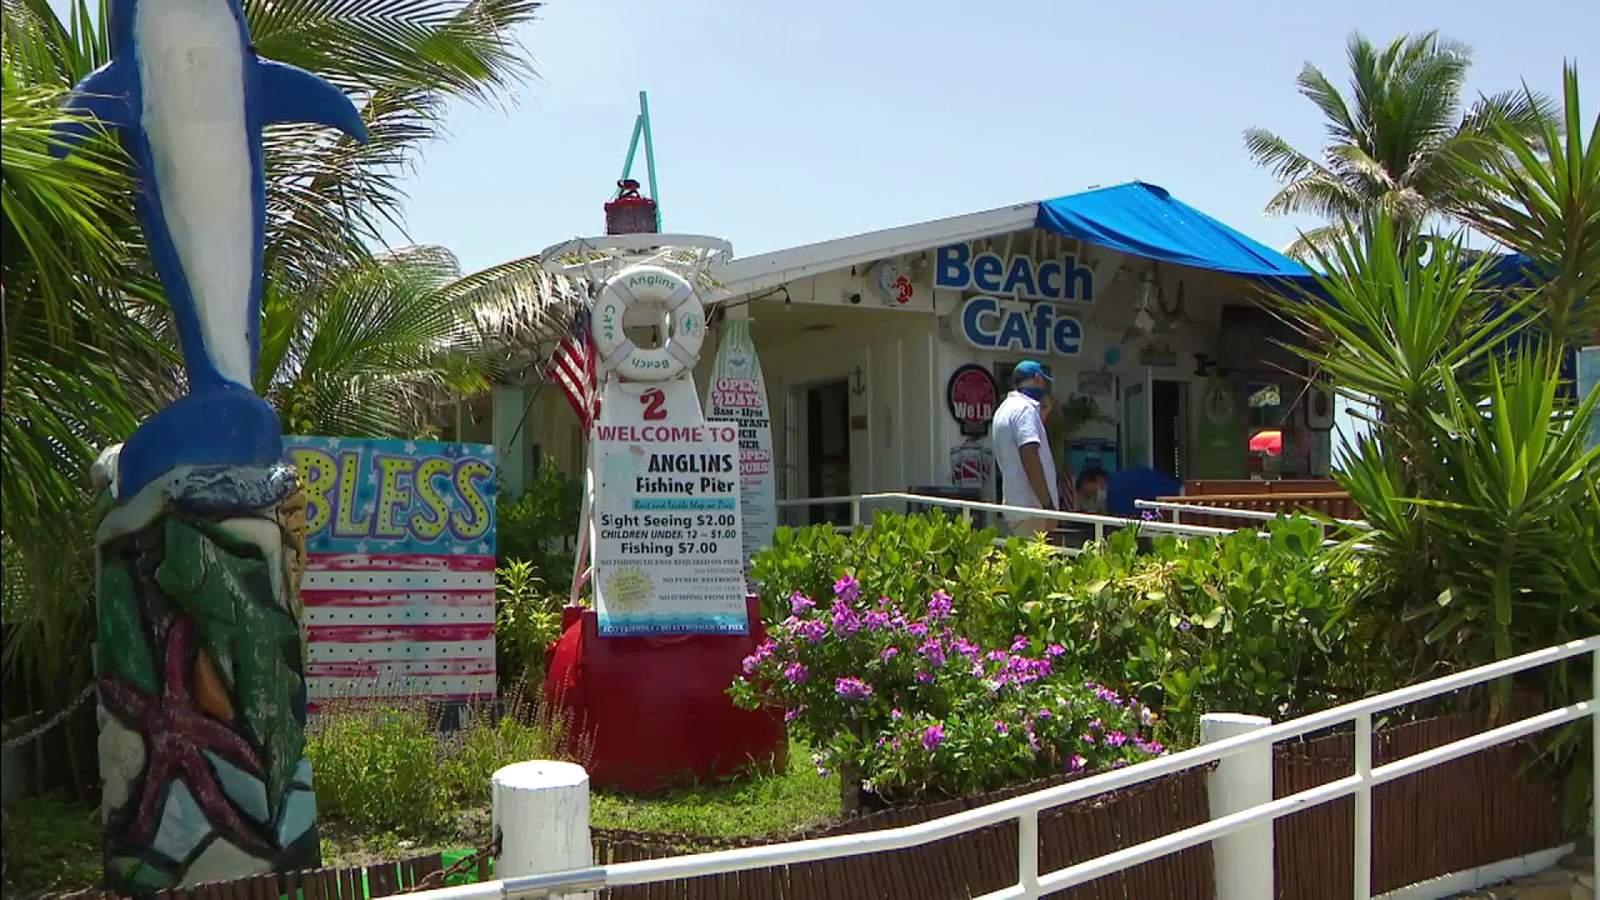 Broward leaders say they had to close beaches. Businesses expect to suffer.